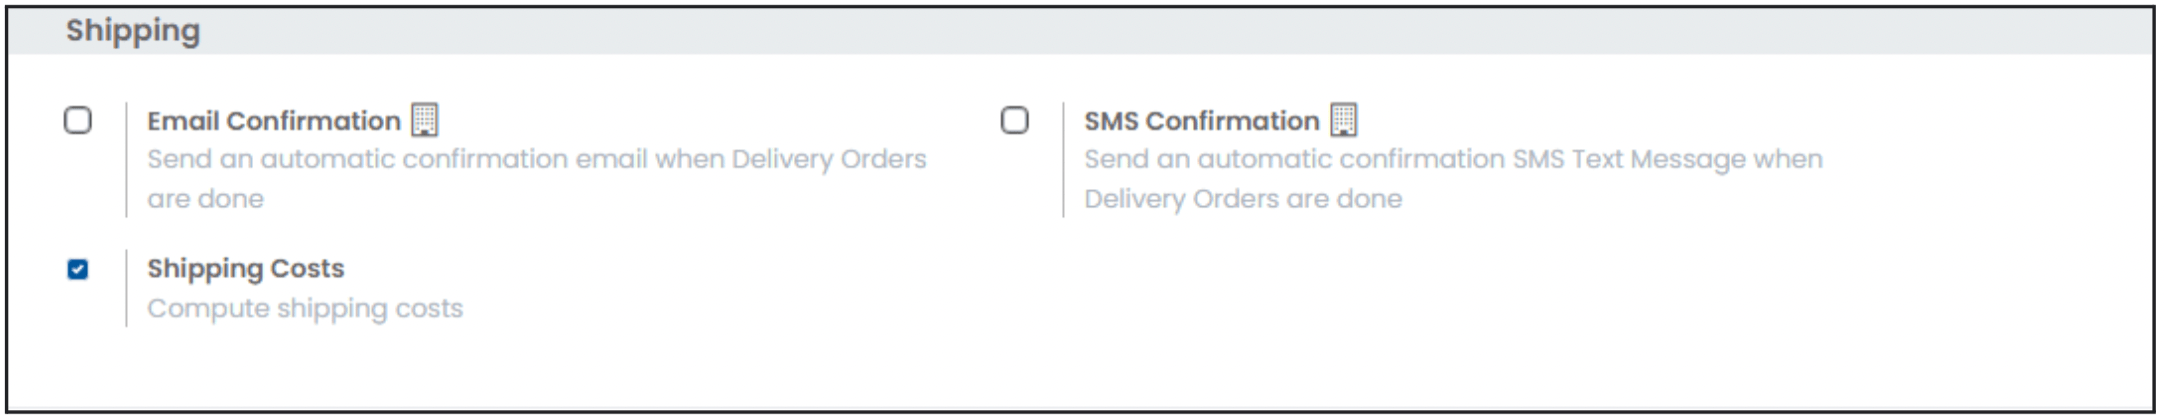 Odoo Inventory Module Configuration Shipping Settings